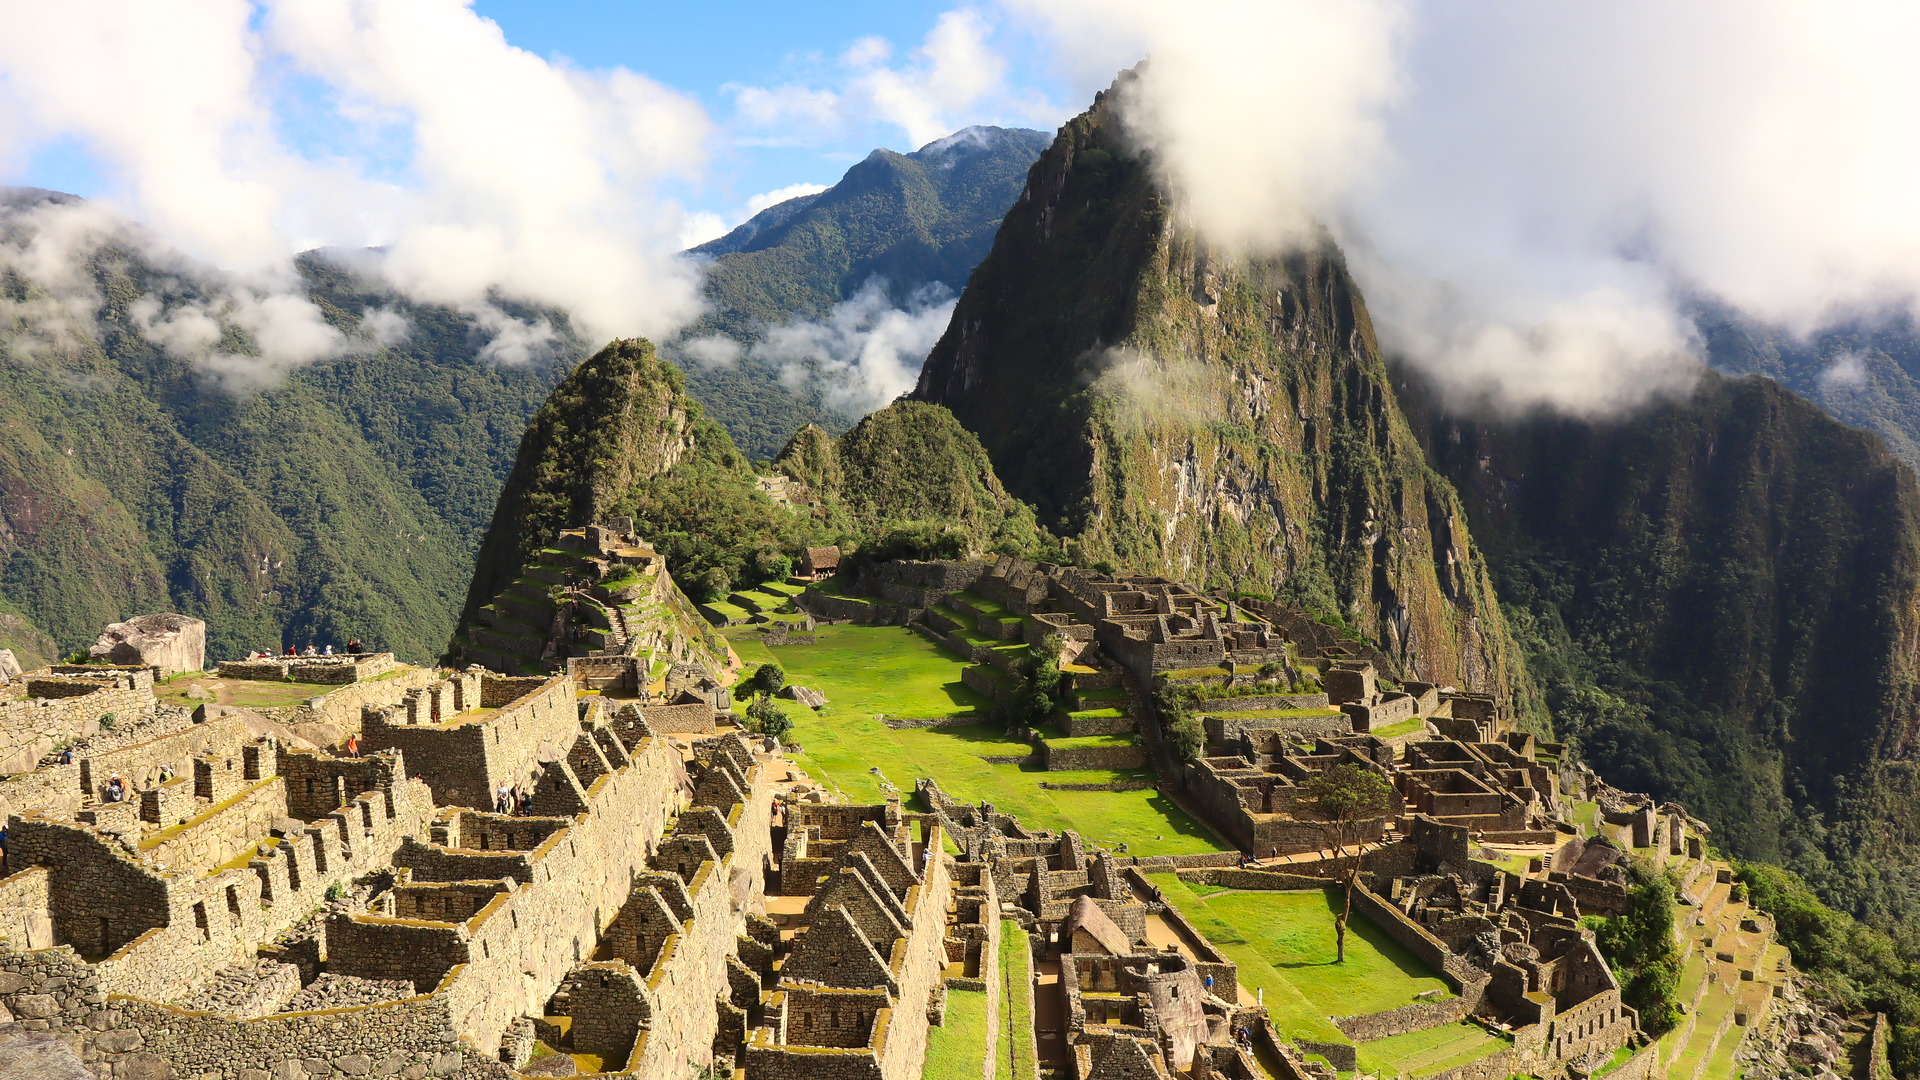 Everything you need to know about going to Machu Picchu